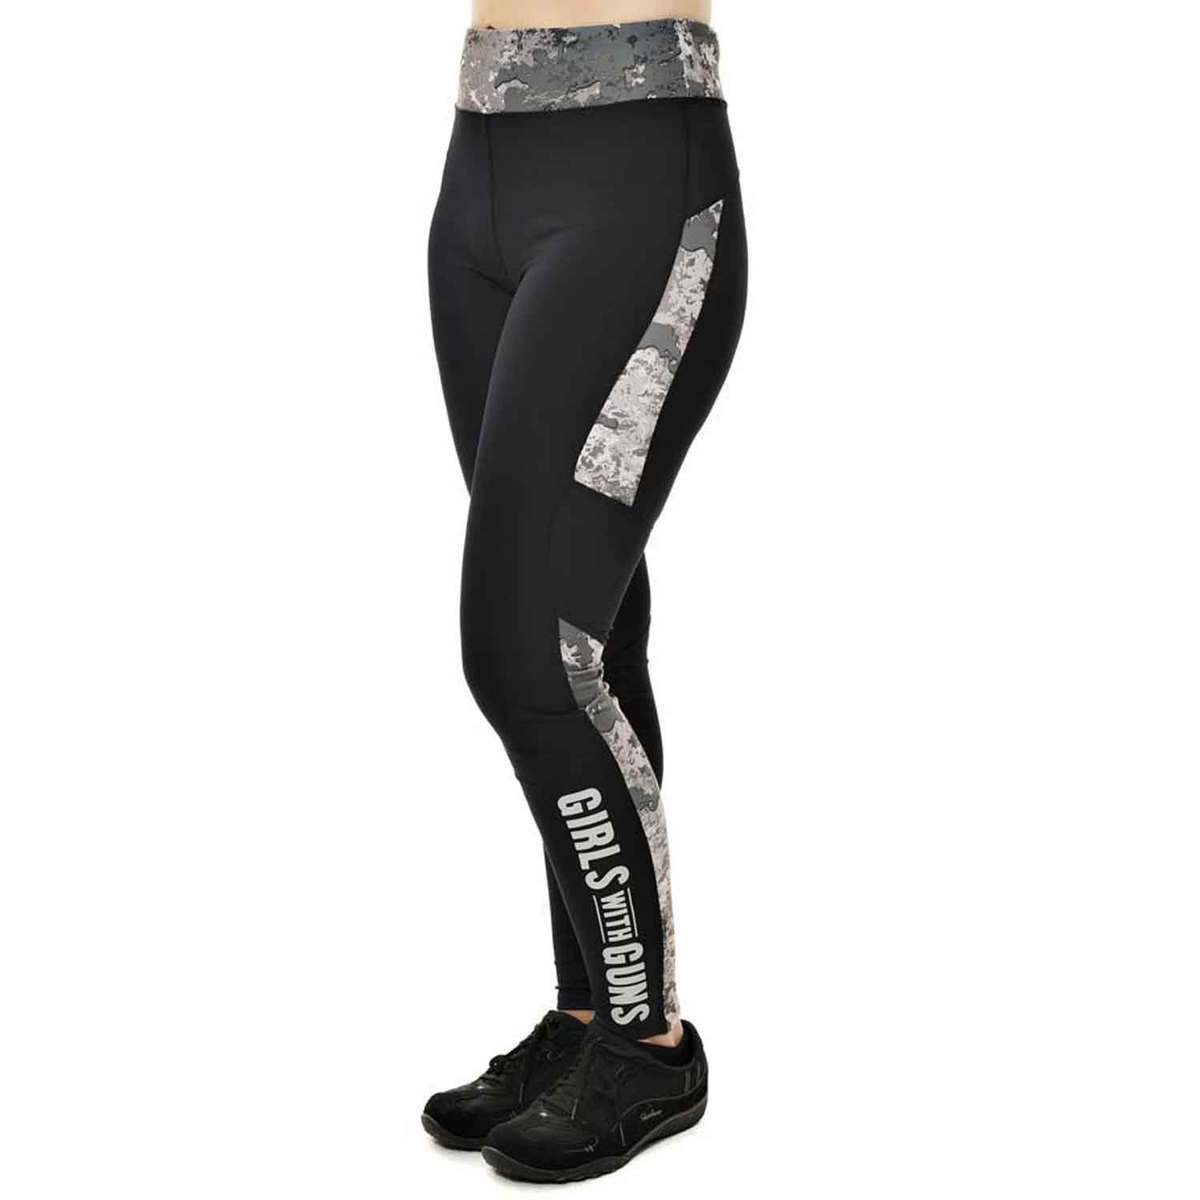 H&m Leggings Sportsman's Warehouse  International Society of Precision  Agriculture